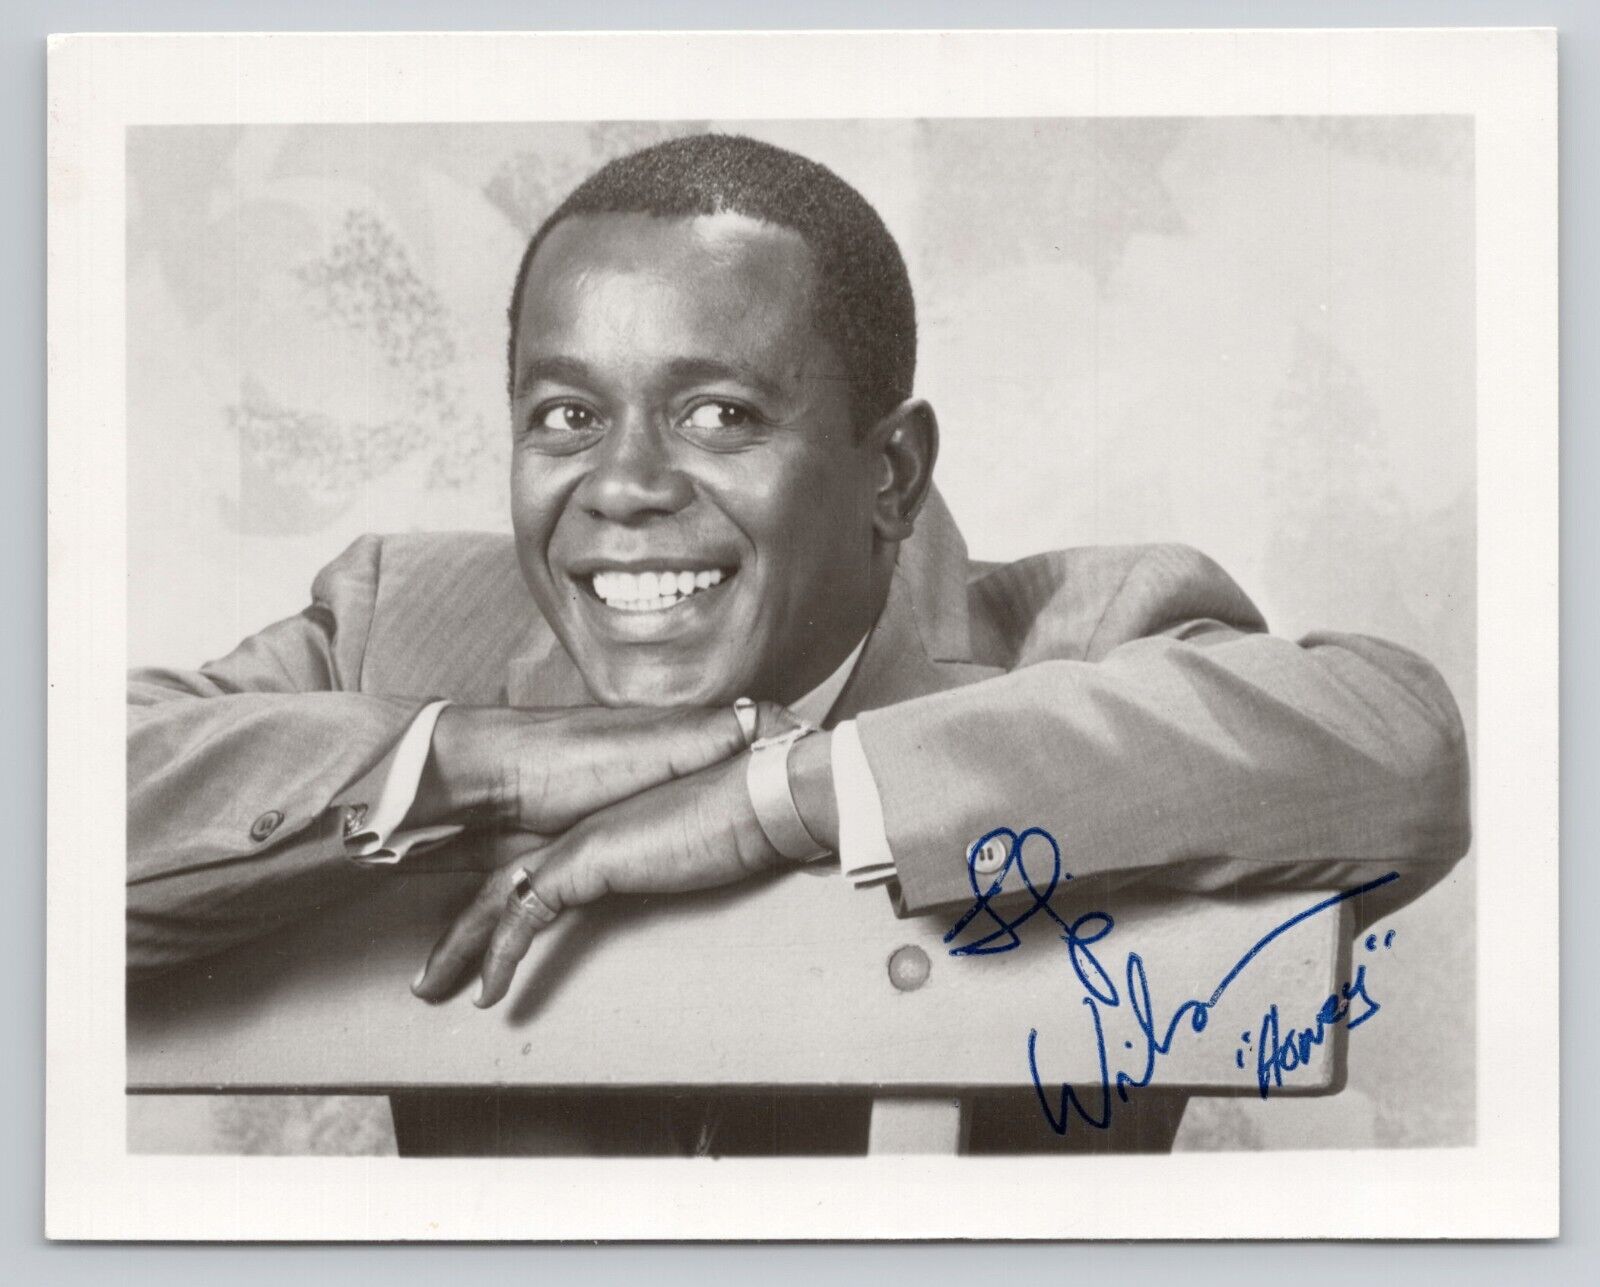 1975 Flip Wilson Photo Signed Inscribed  TV Star Comedian Actor Laugh-In  4”x5”